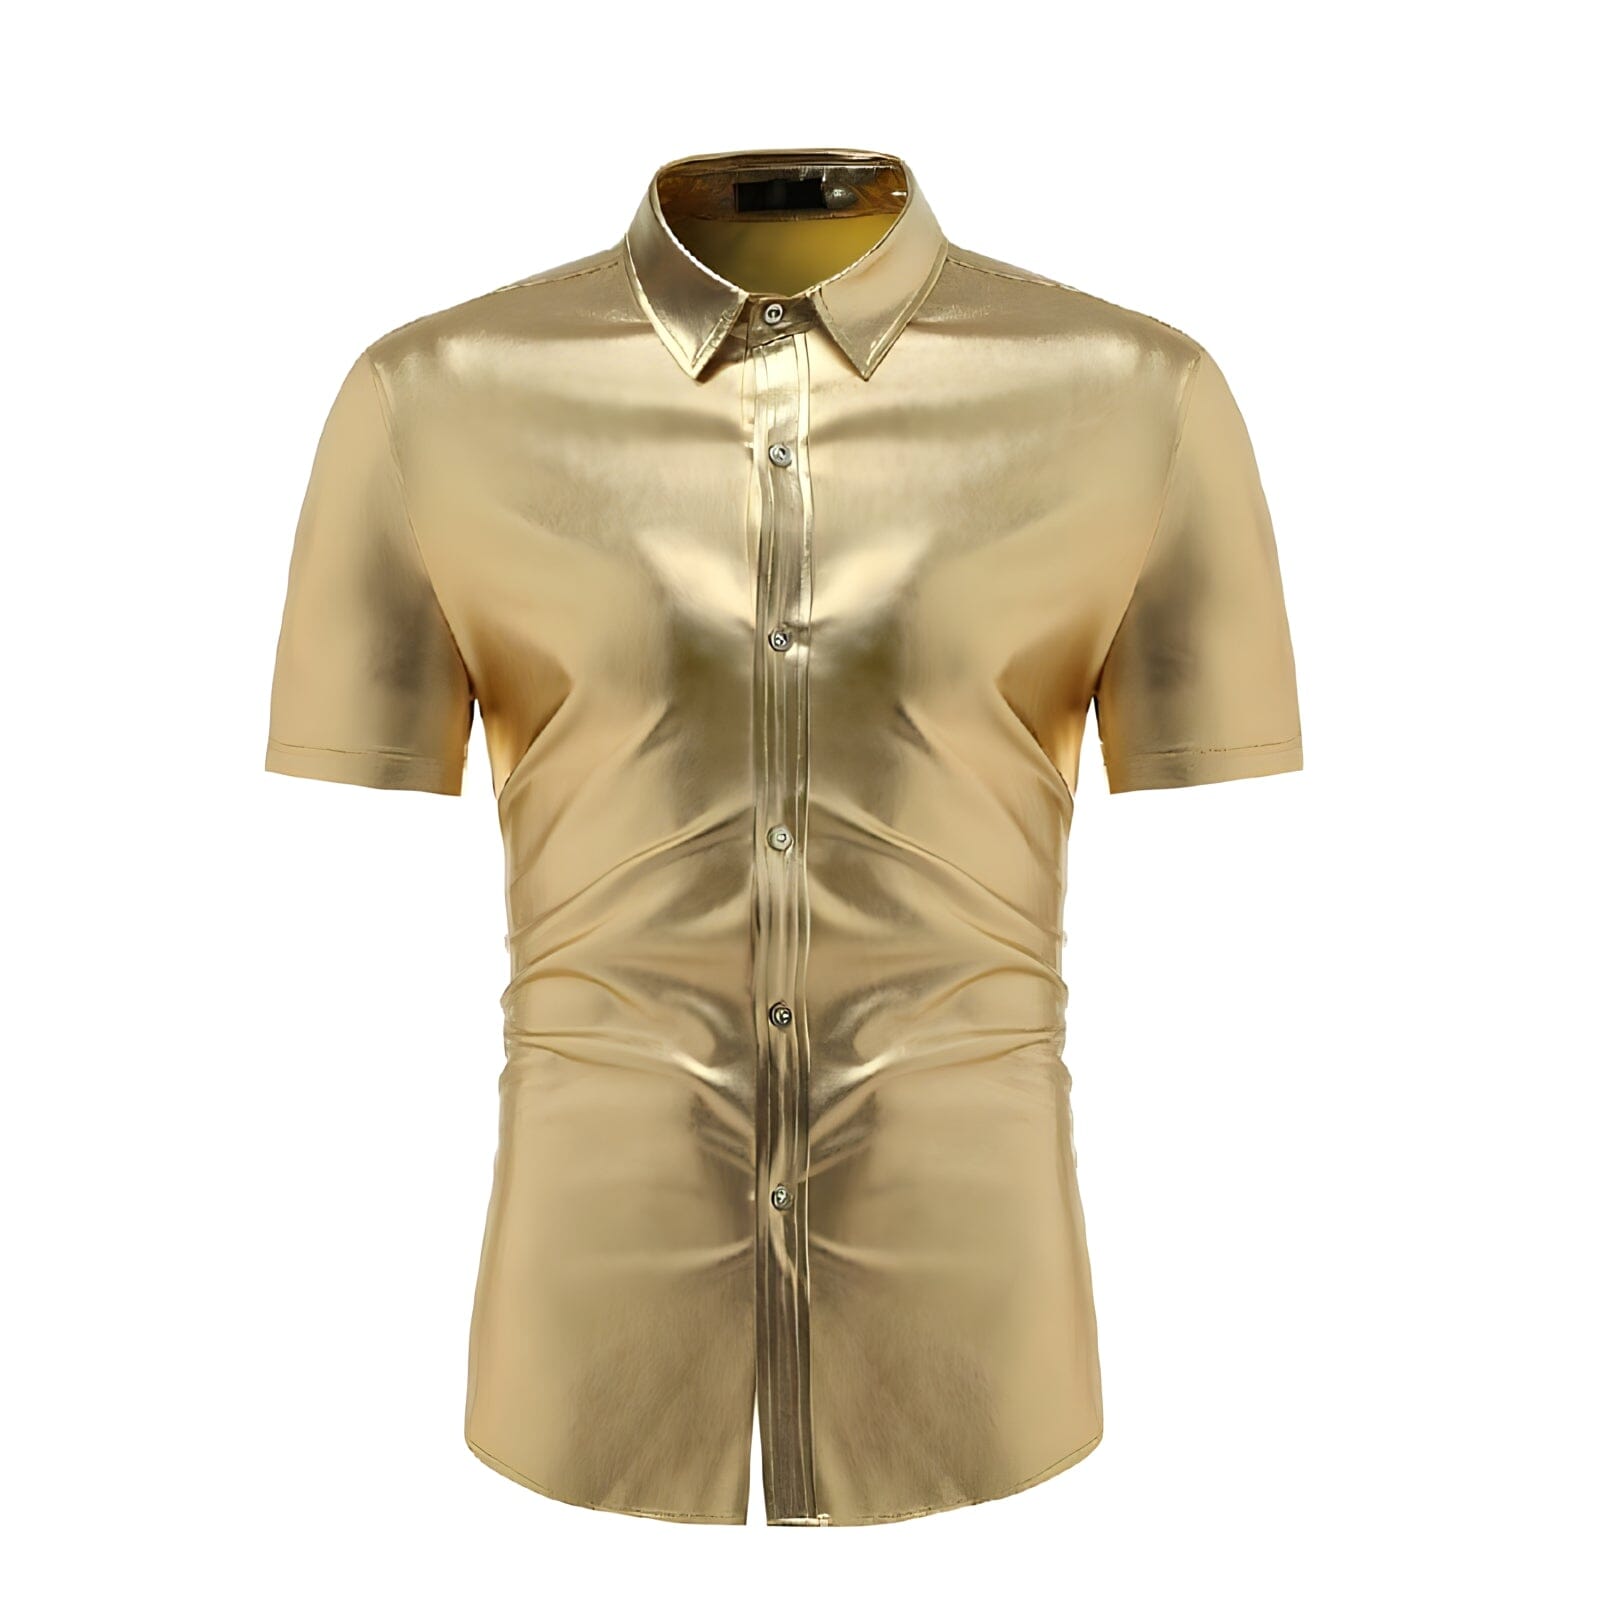 The Manchester High Gloss Short Sleeve Shirt - Multiple Colors WD Styles Gold S 